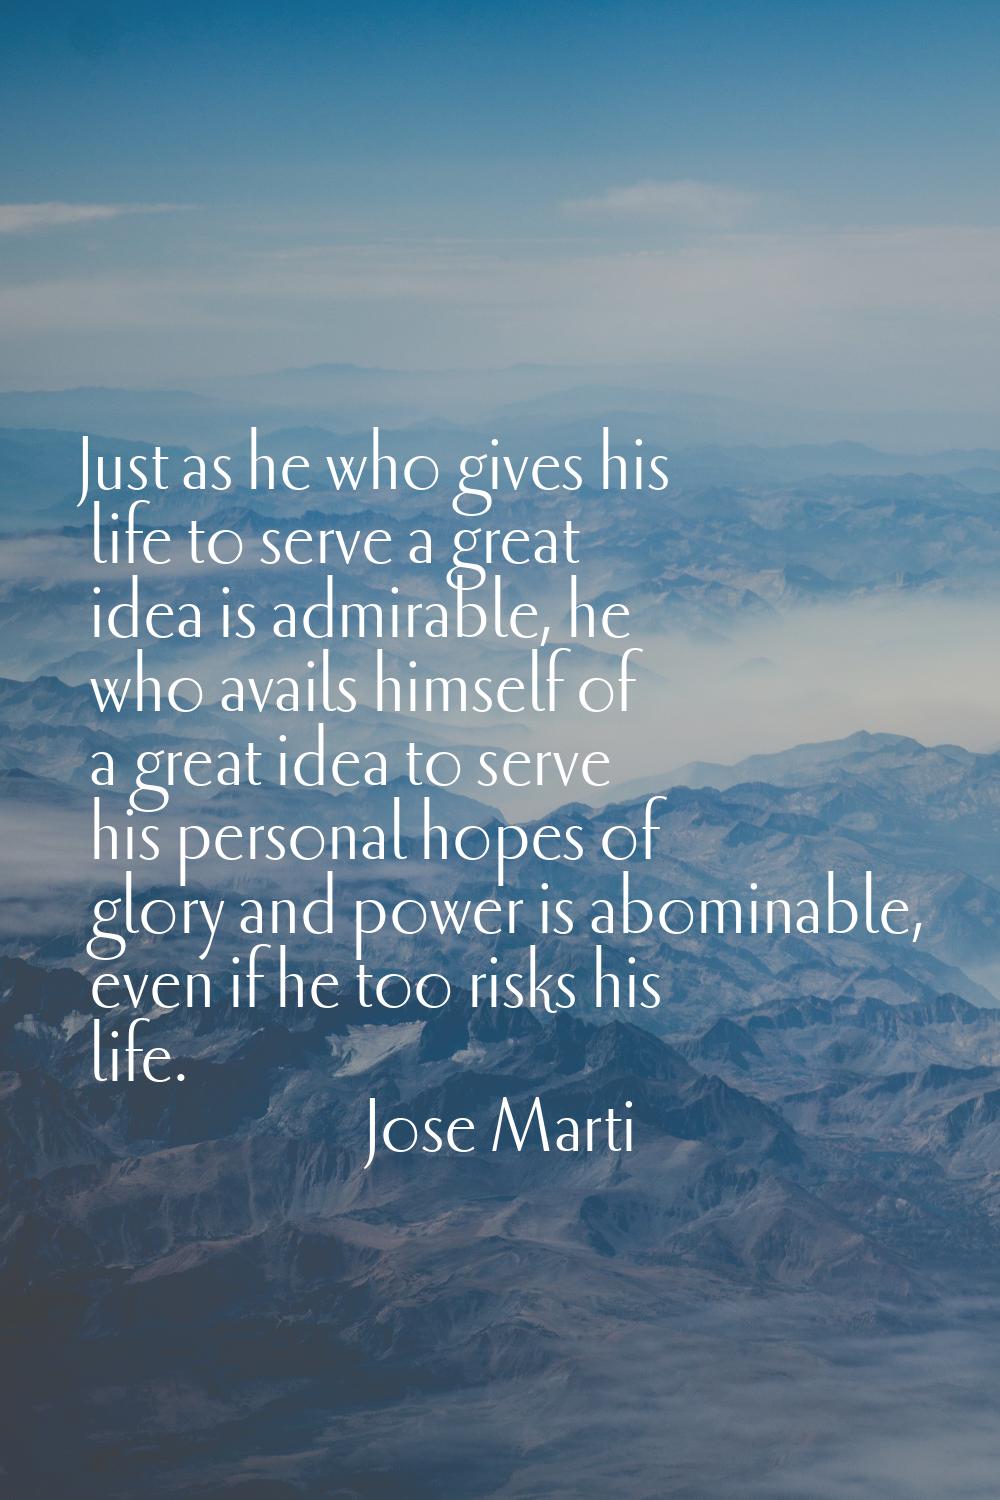 Just as he who gives his life to serve a great idea is admirable, he who avails himself of a great 